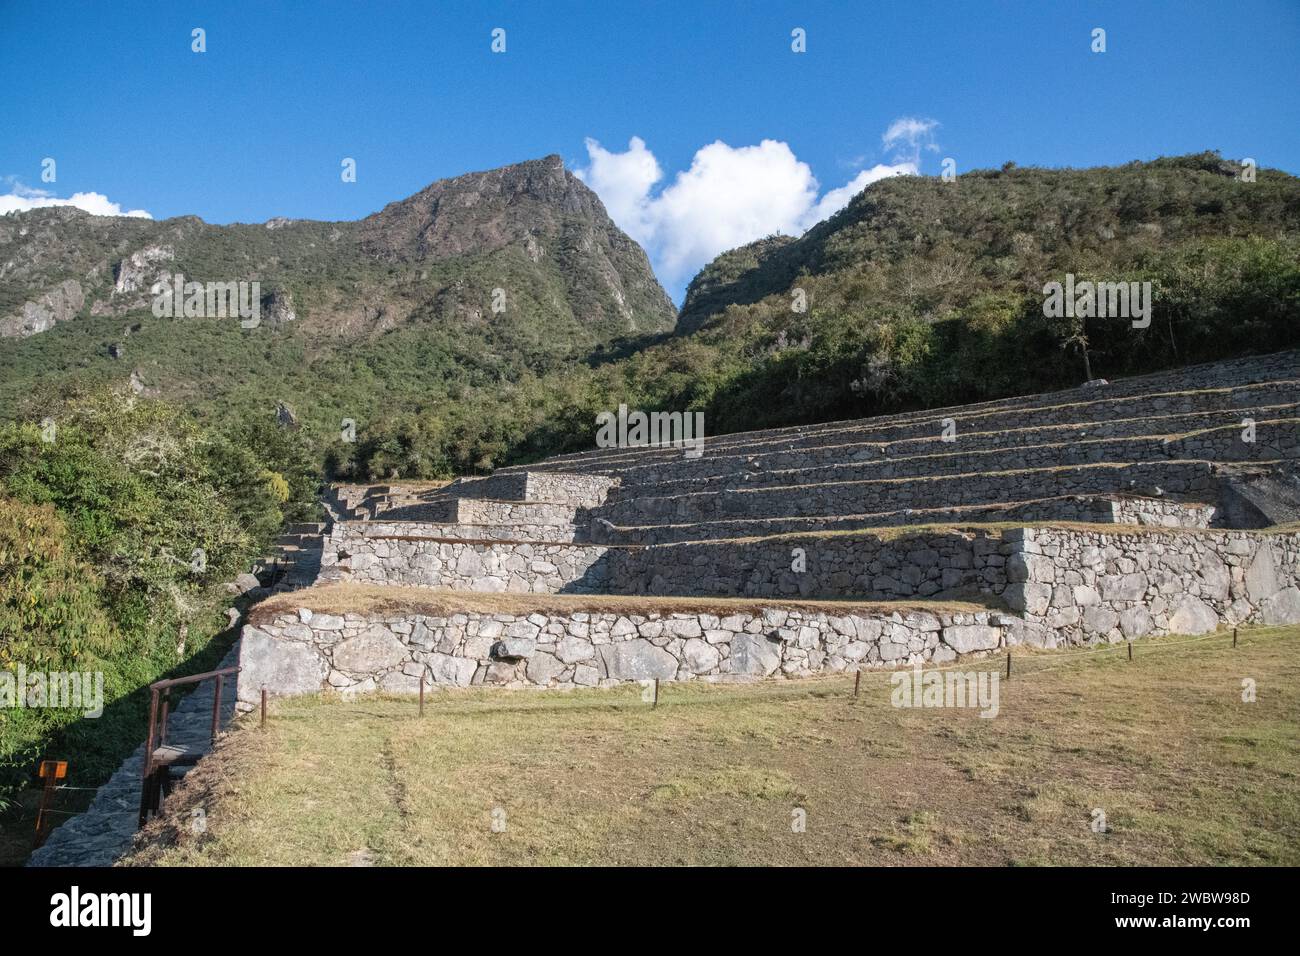 A view of the terraces and ruins of the Machu Picchu citadel in the Sacred Valley in Peru Stock Photo